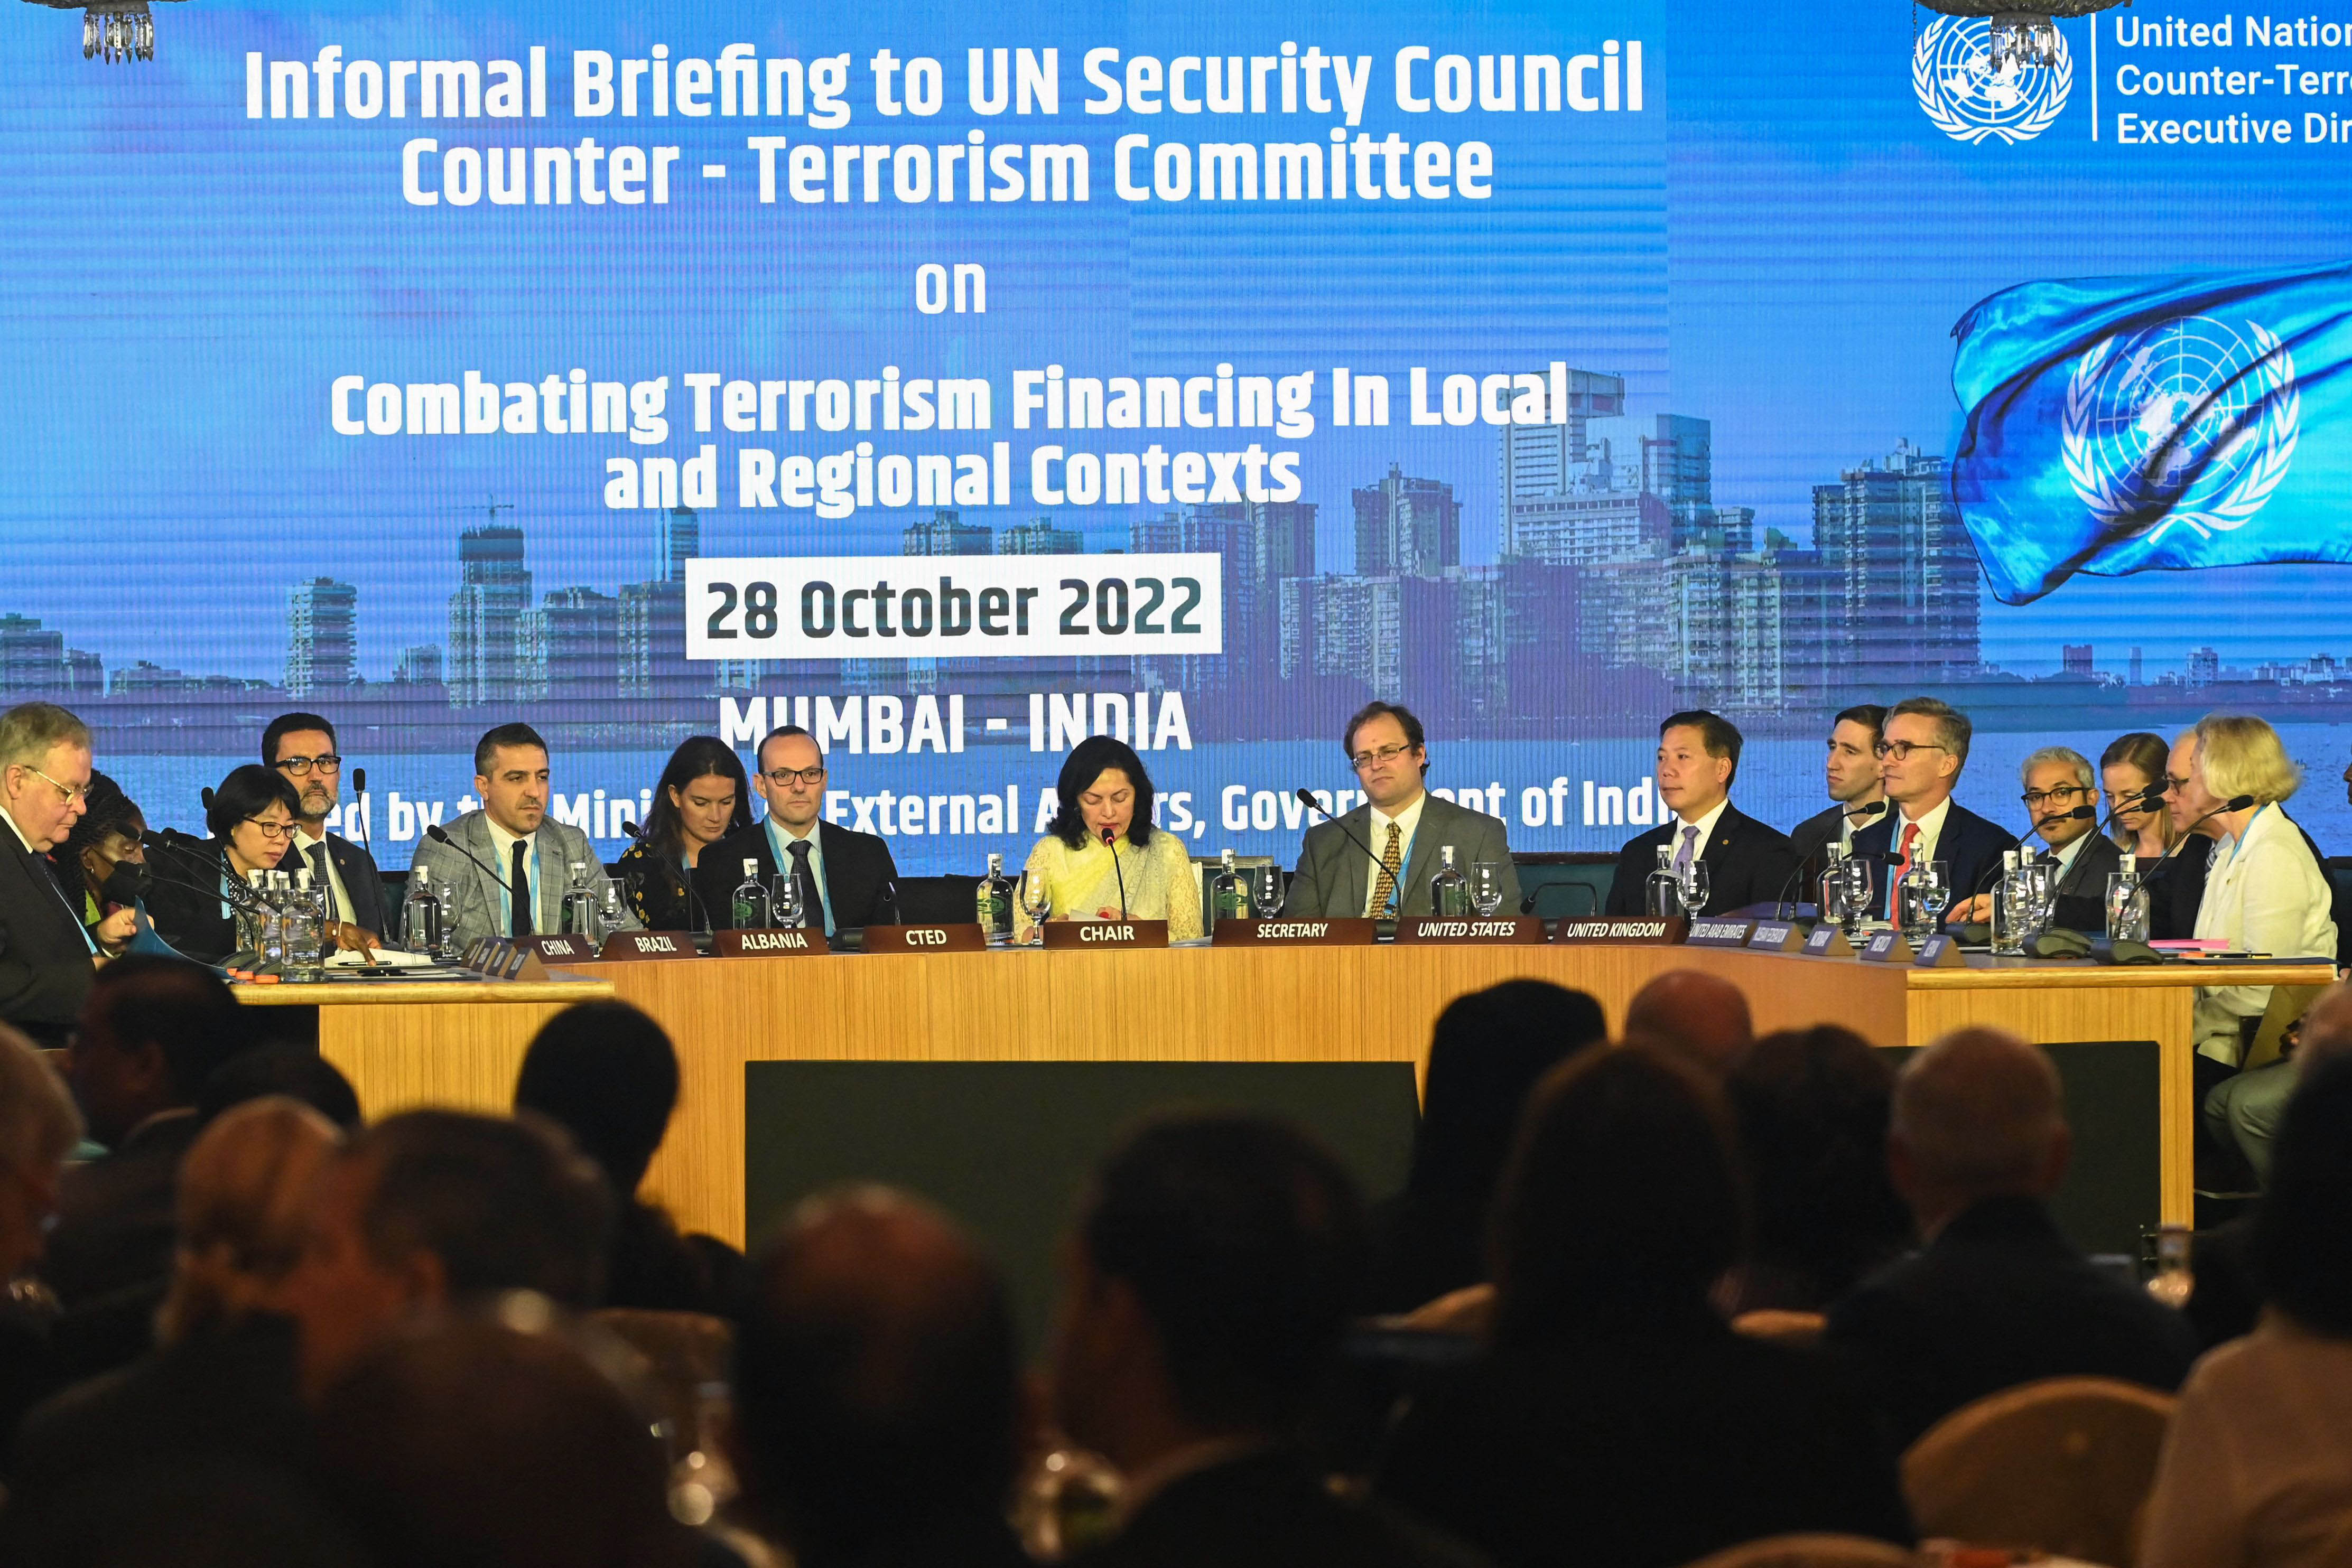 India opens a UN Security Council Counter-Terrorism Committee meeting on October 28, 2022 at the Taj Mahal Palace hotel in Mumbai, the scene of a deadly armed extremist attack in 2008.